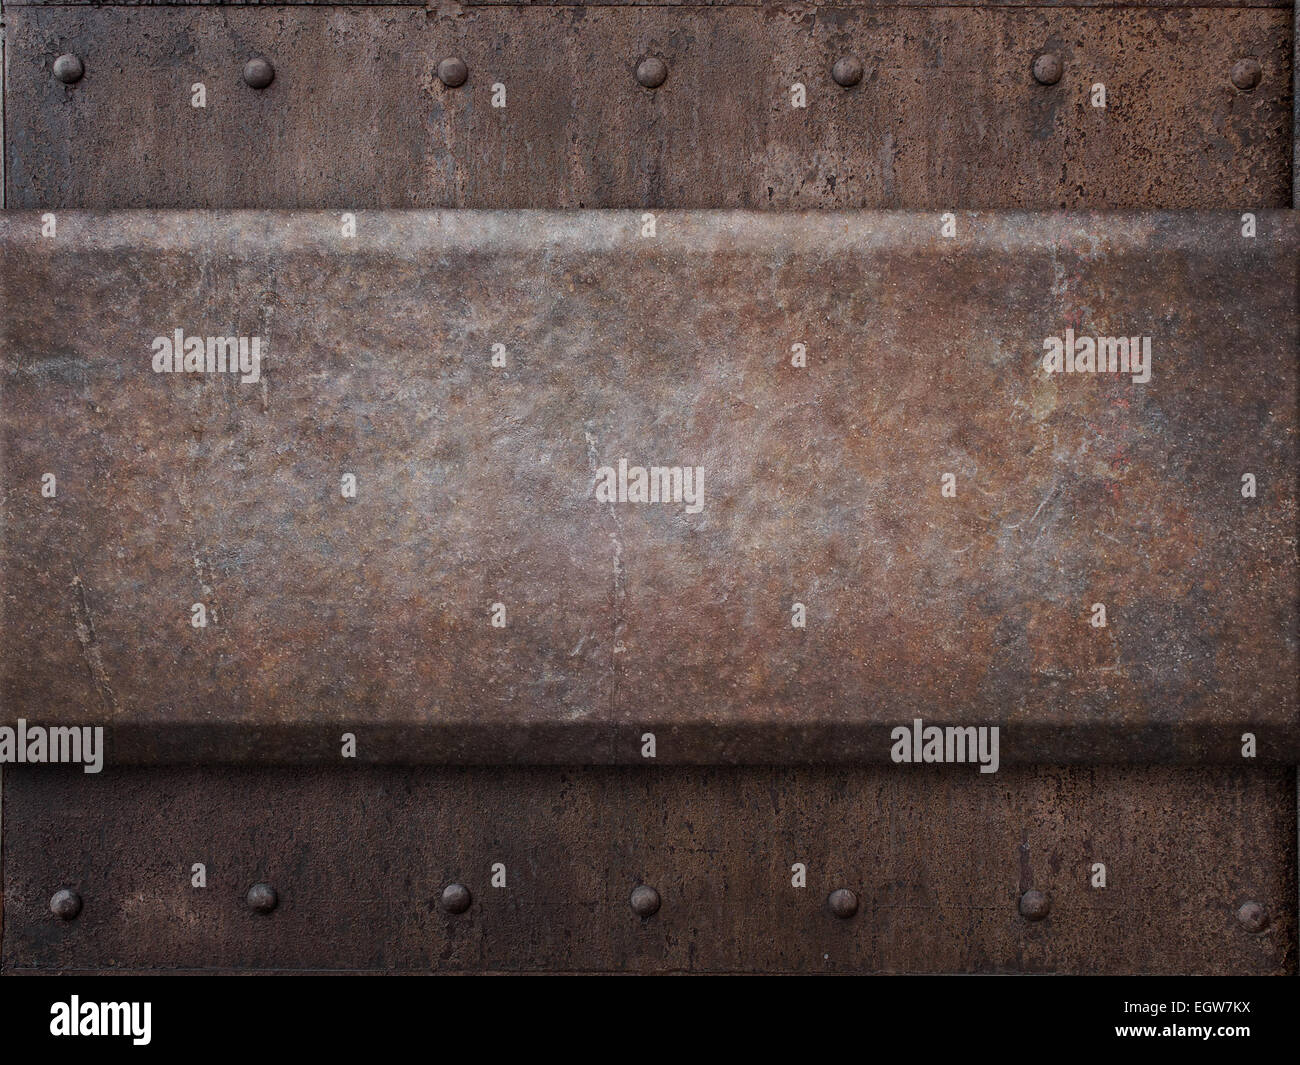 rusty tank armor metal texture with rivets as steam punk background Stock Photo